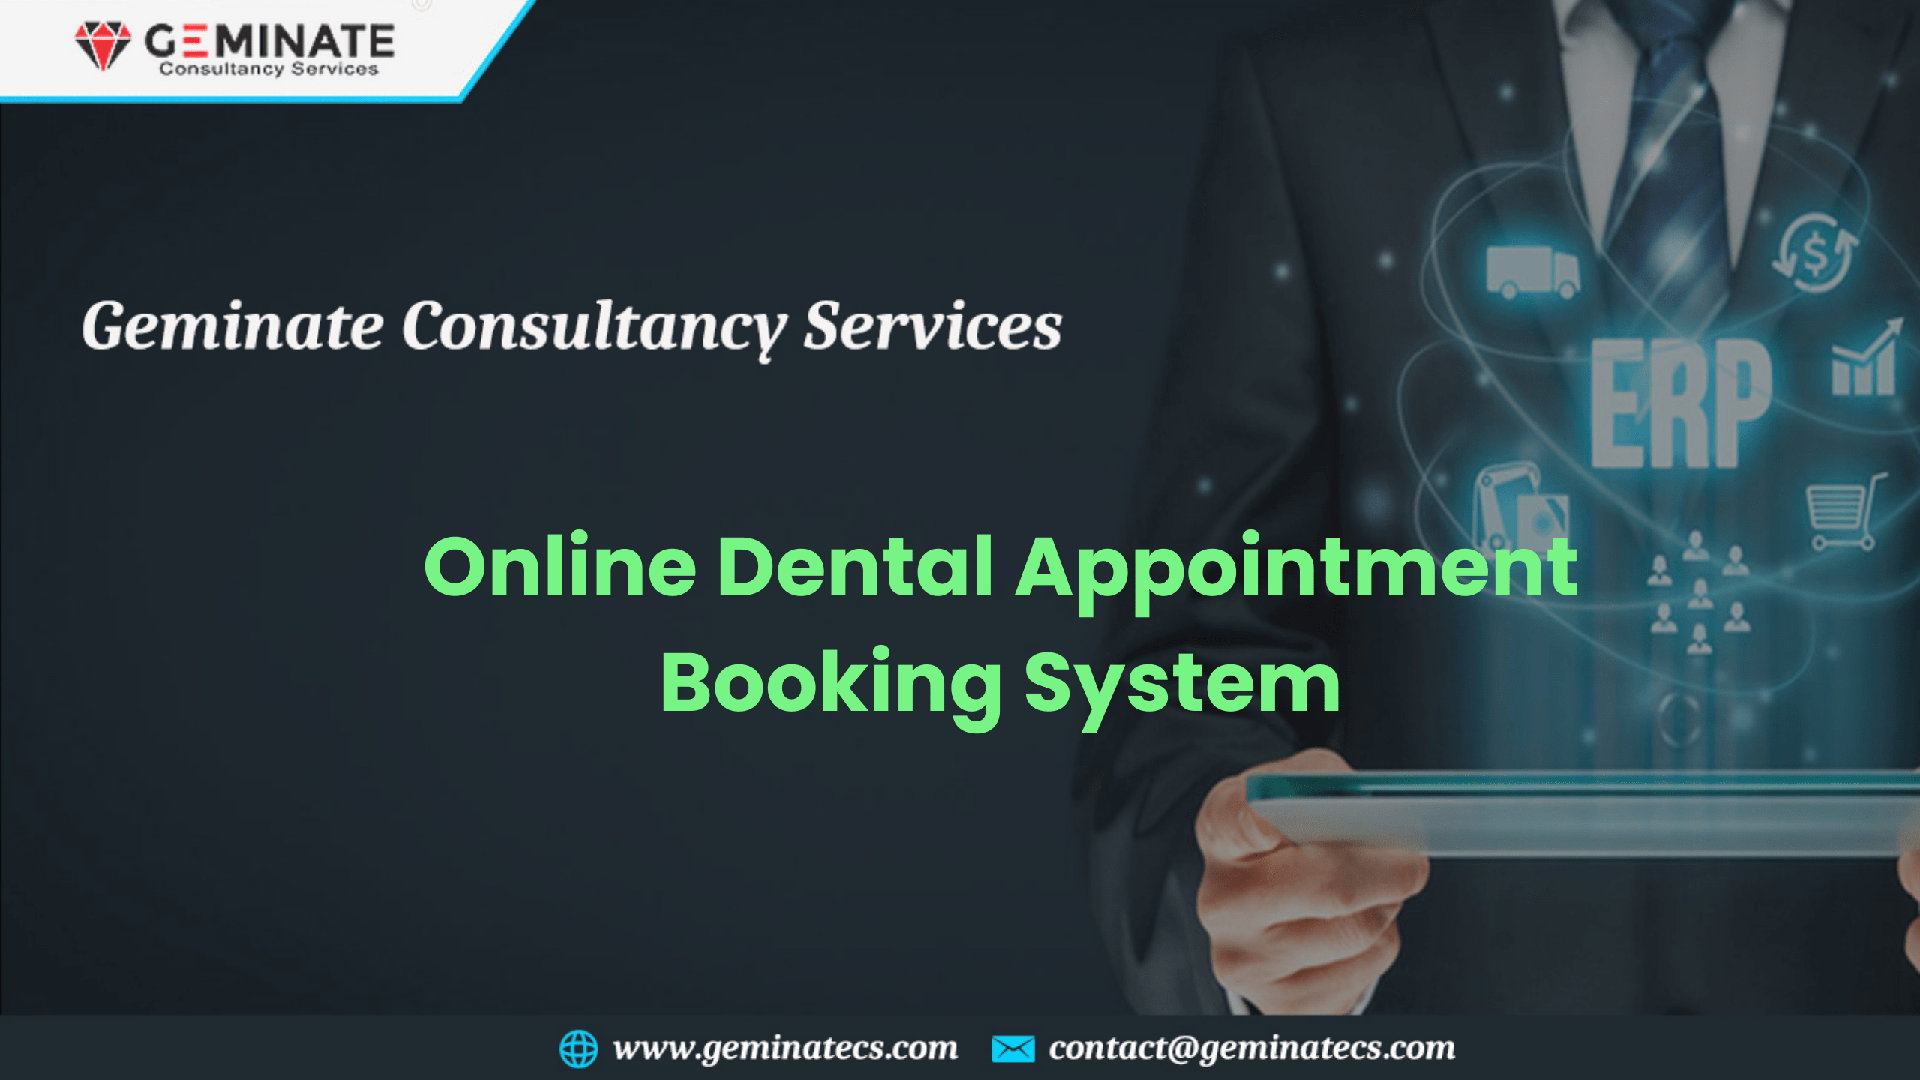 Online Dental Appointment Booking System